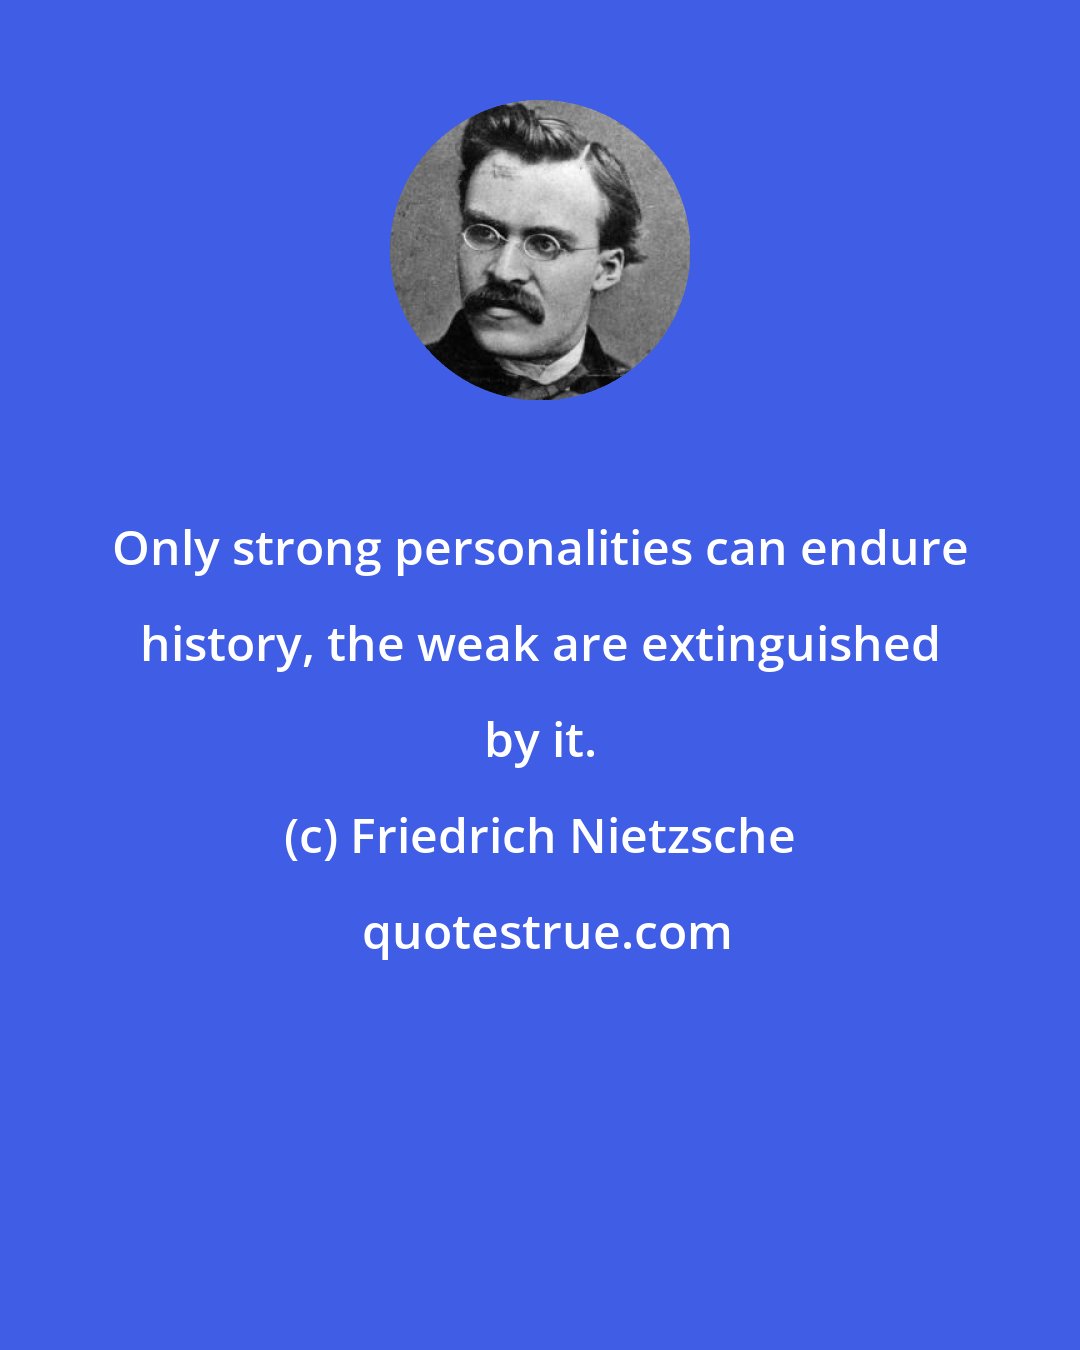 Friedrich Nietzsche: Only strong personalities can endure history, the weak are extinguished by it.